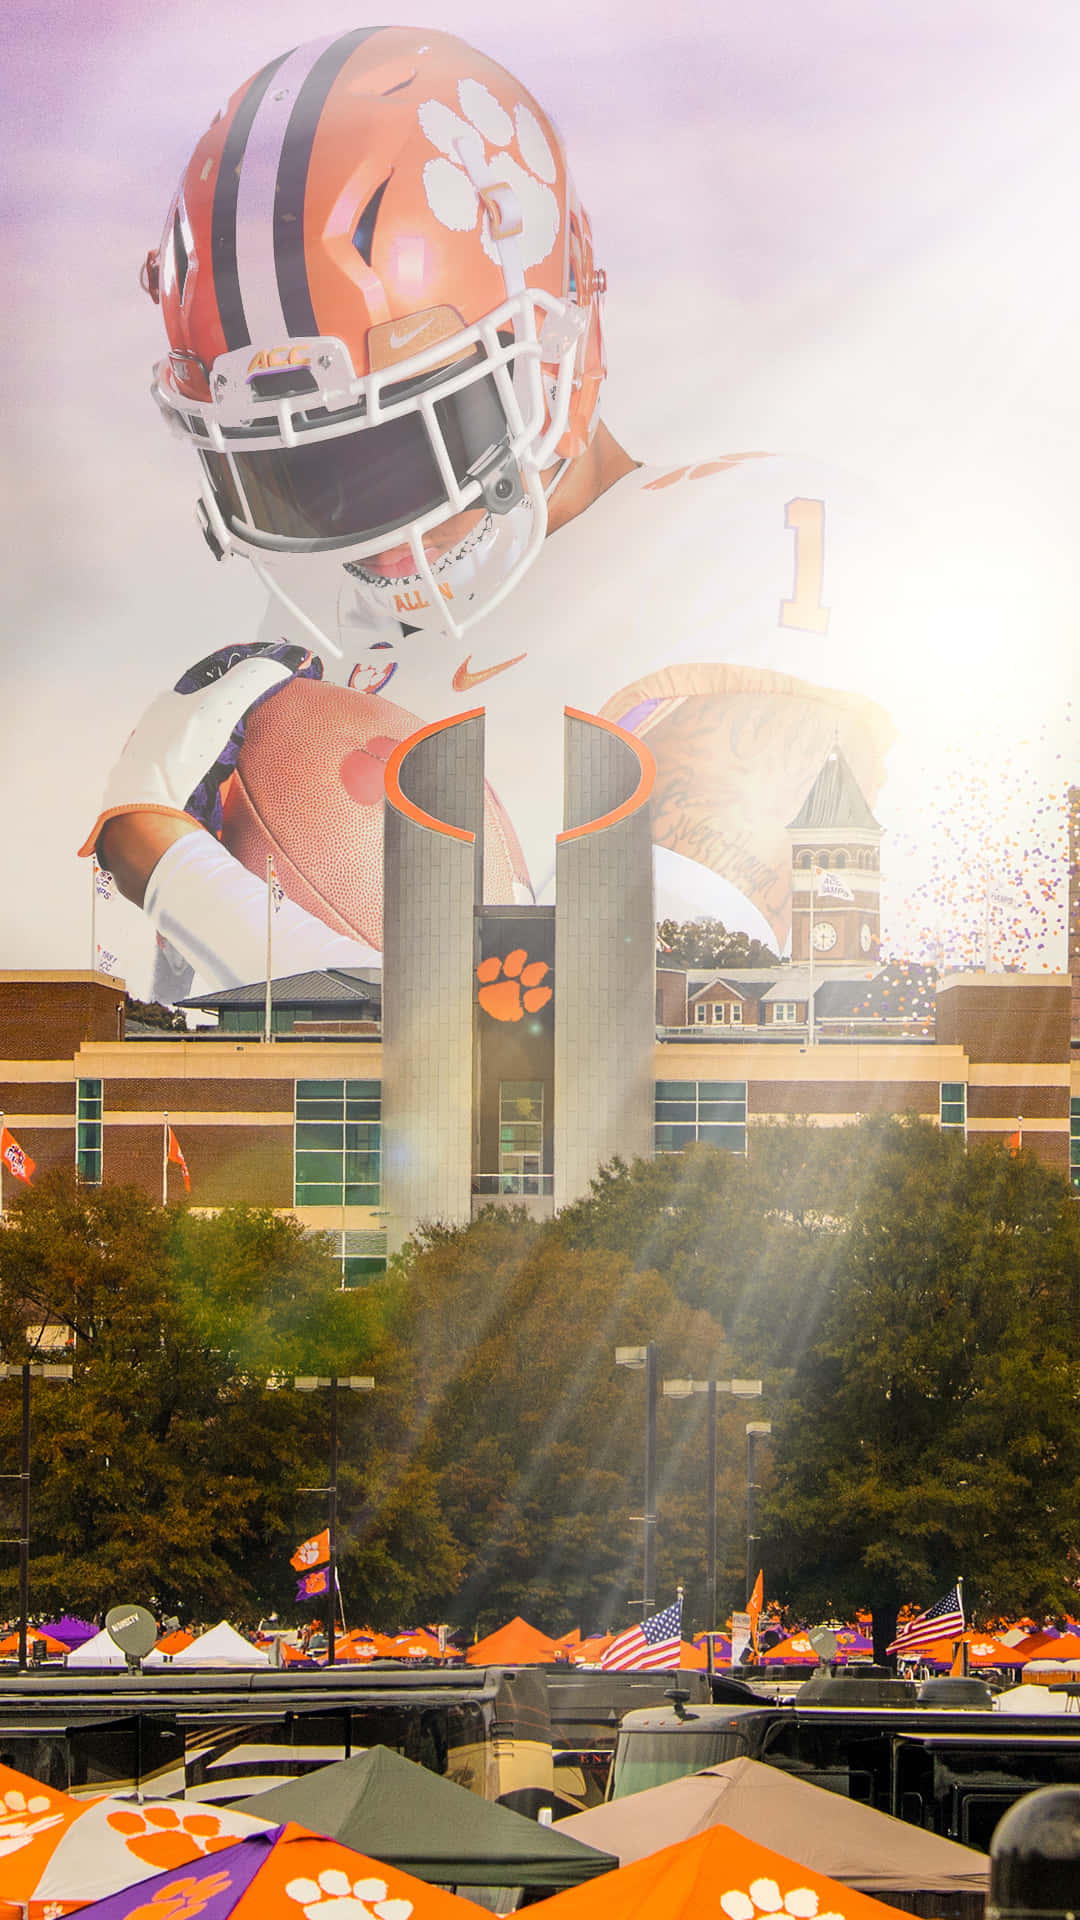 Cheer on the Clemson Tigers with an official Clemson iPhone Wallpaper